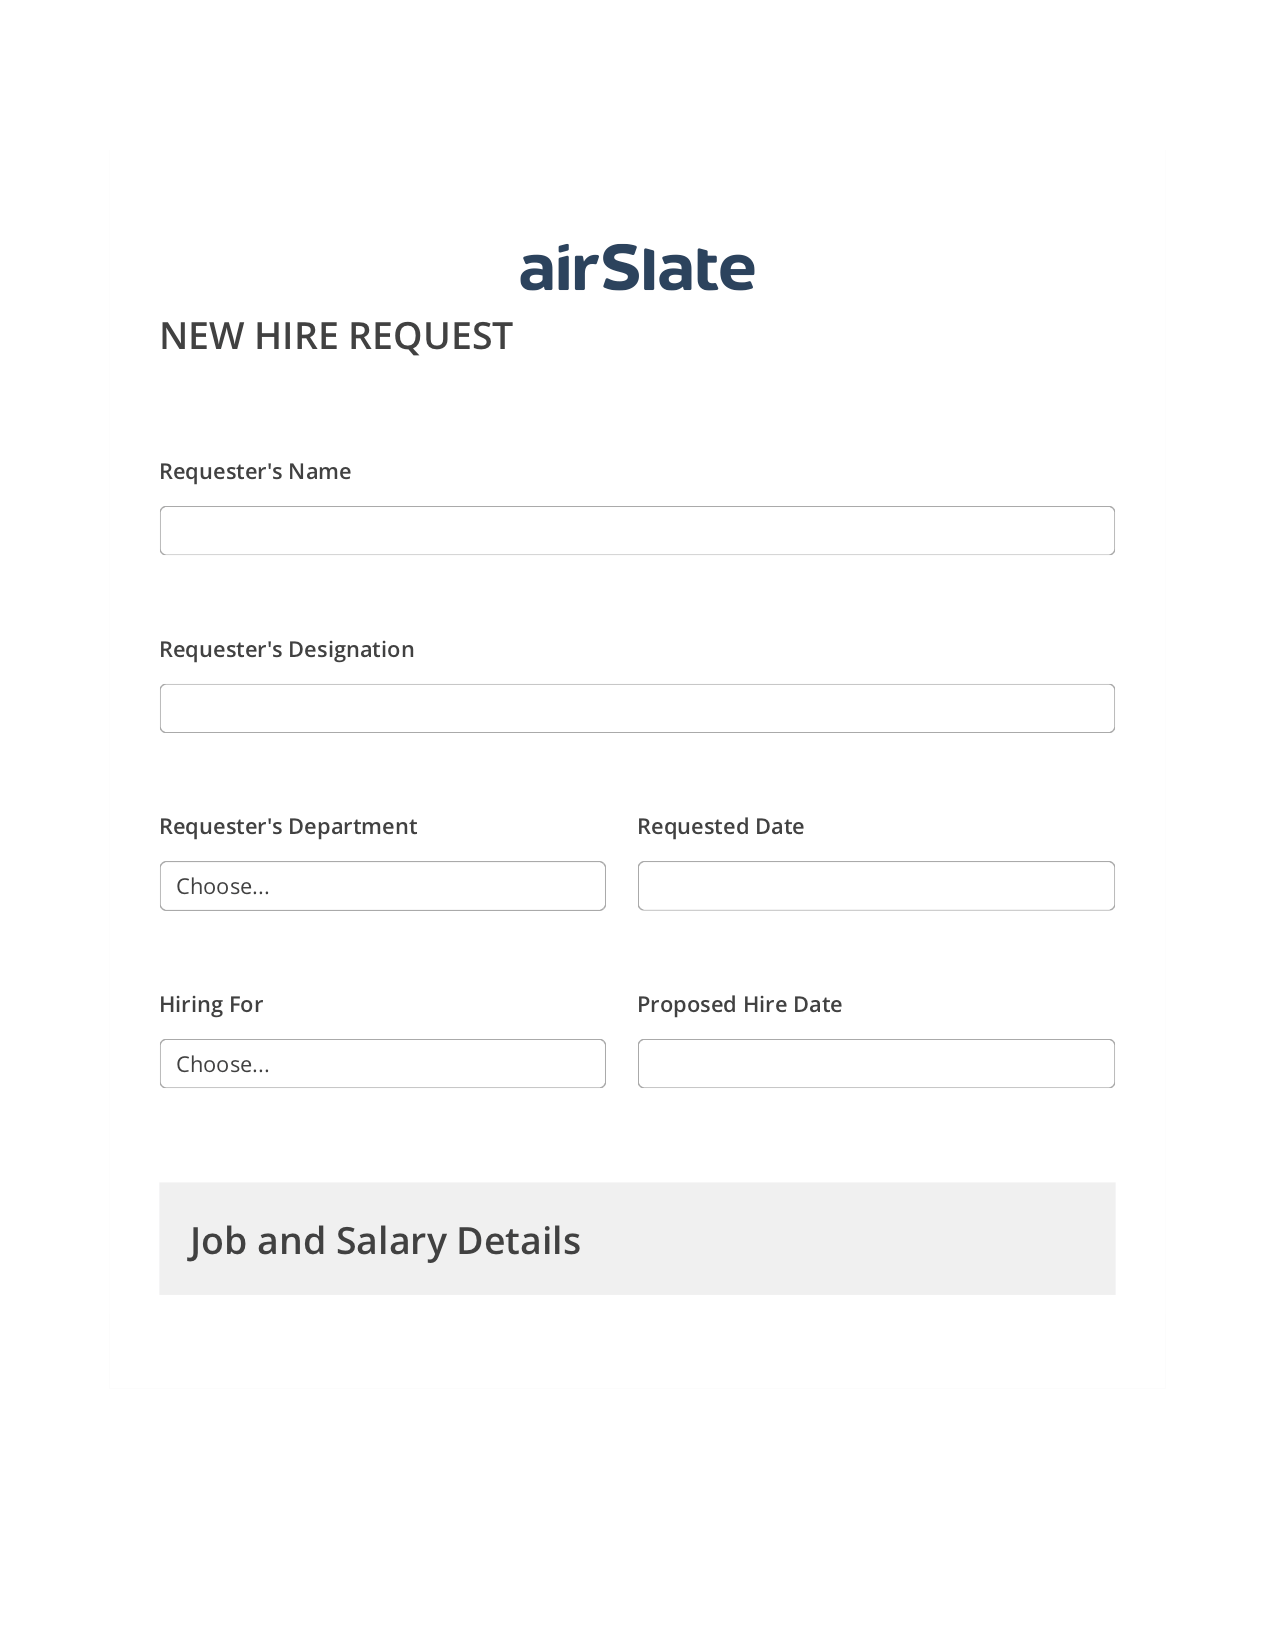 Multirole Hiring Request Workflow Pre-fill Dropdowns from Google Sheet Bot, Create slate bot, Archive to SharePoint Folder Bot